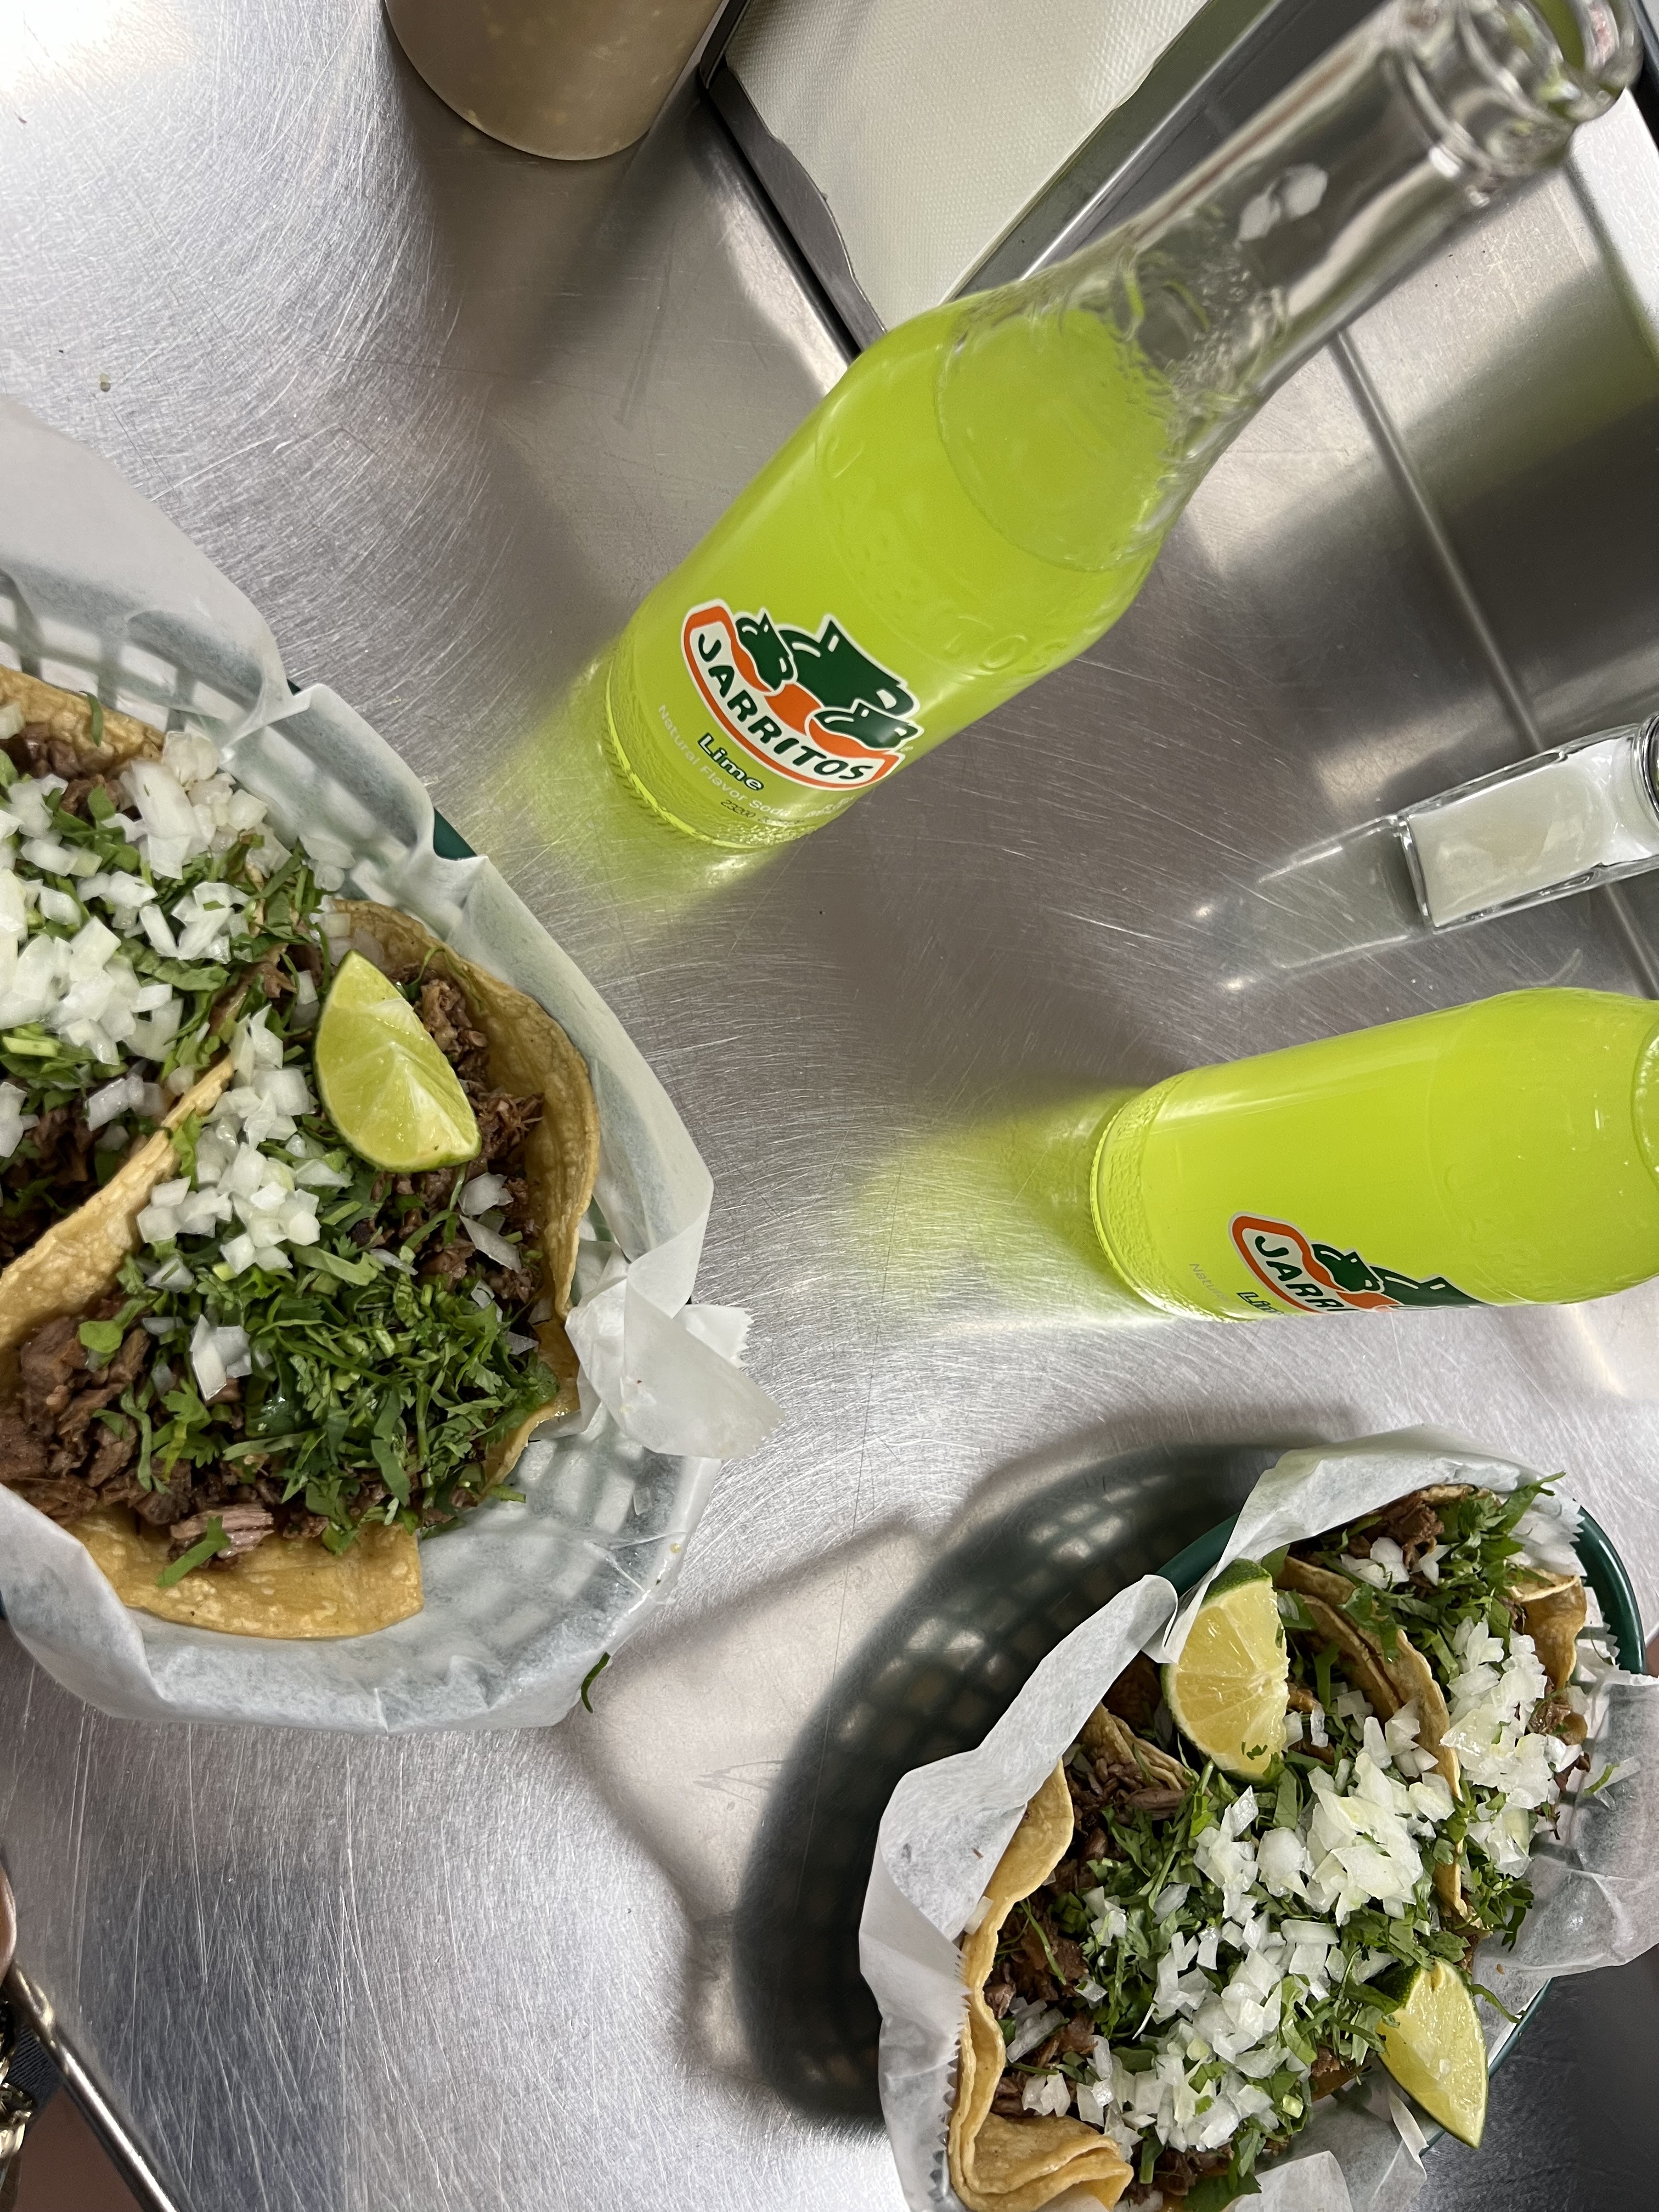 tacos, chicago travel guide, chicago food, chicago restaurants, chicago travel guide